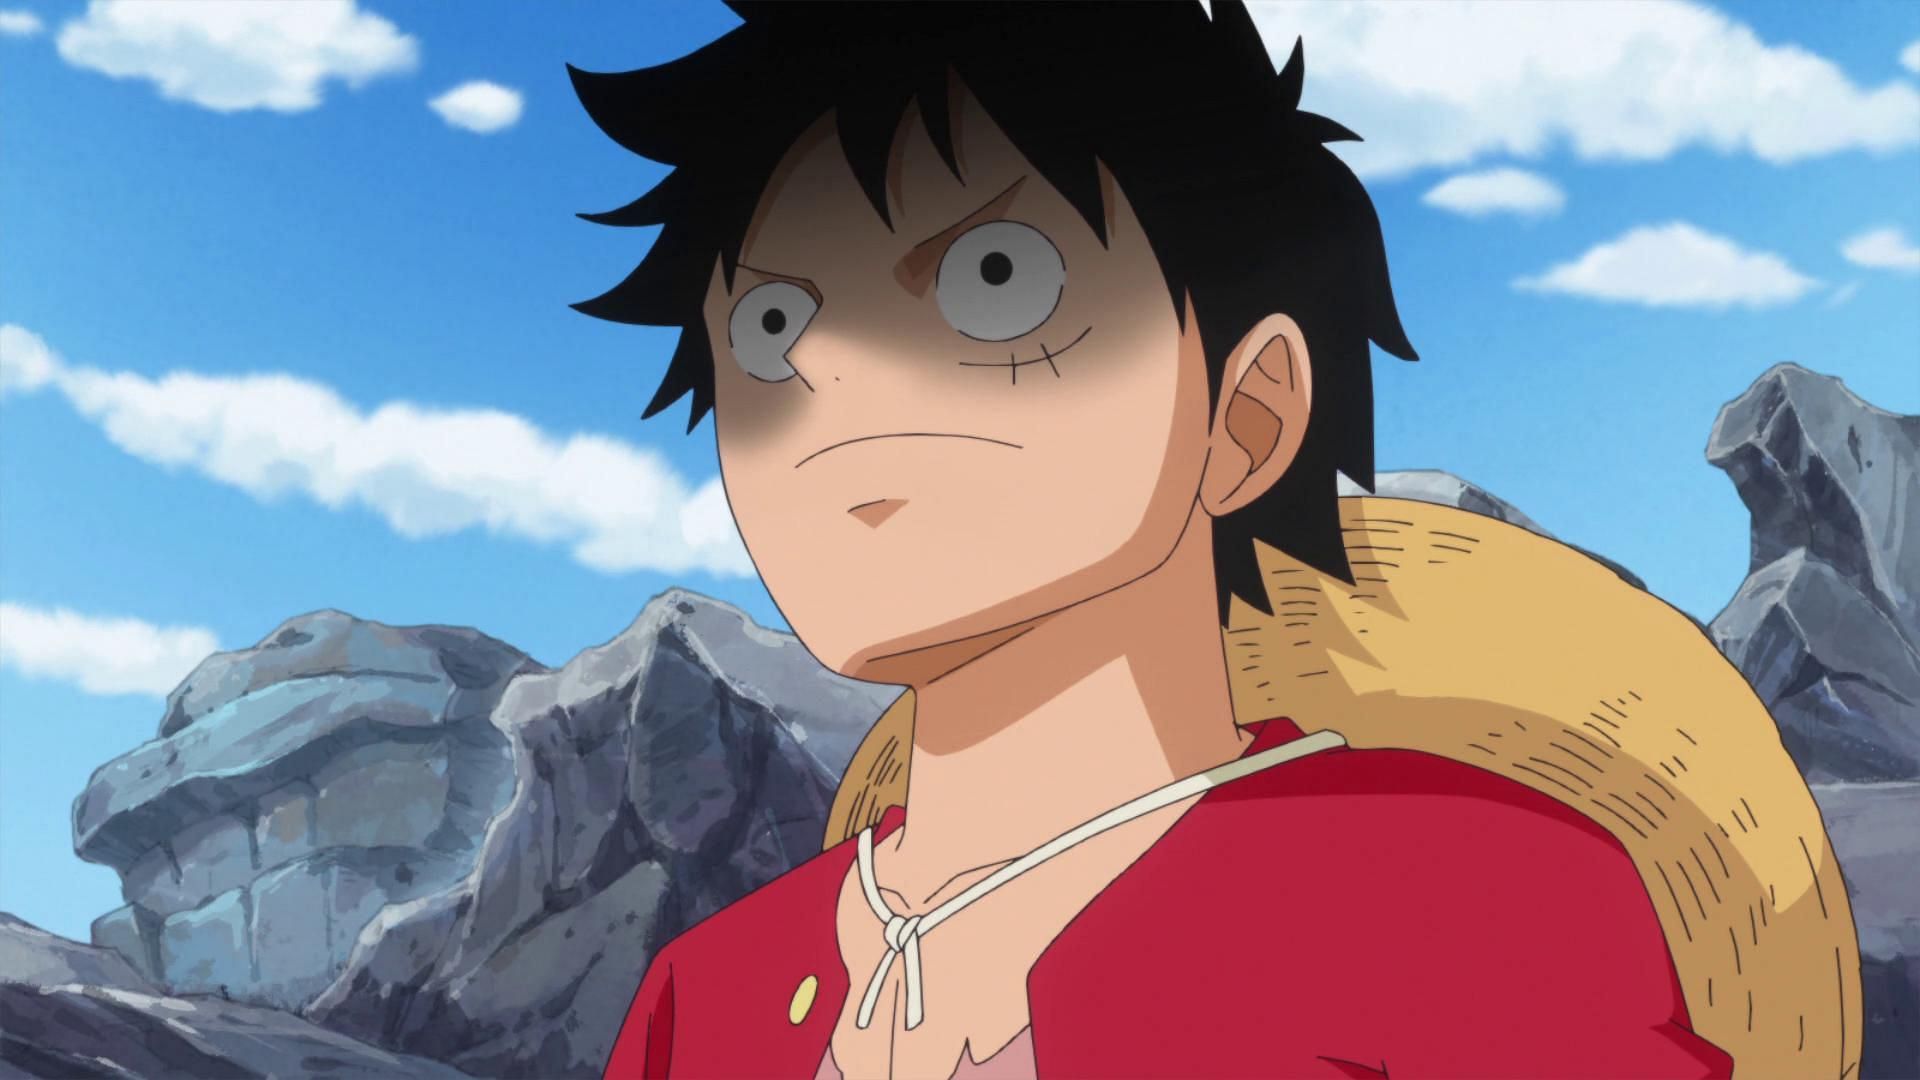 Most One Piece characters have very little screentime compared to Luffy (Image via Toei Animation, One Piece)